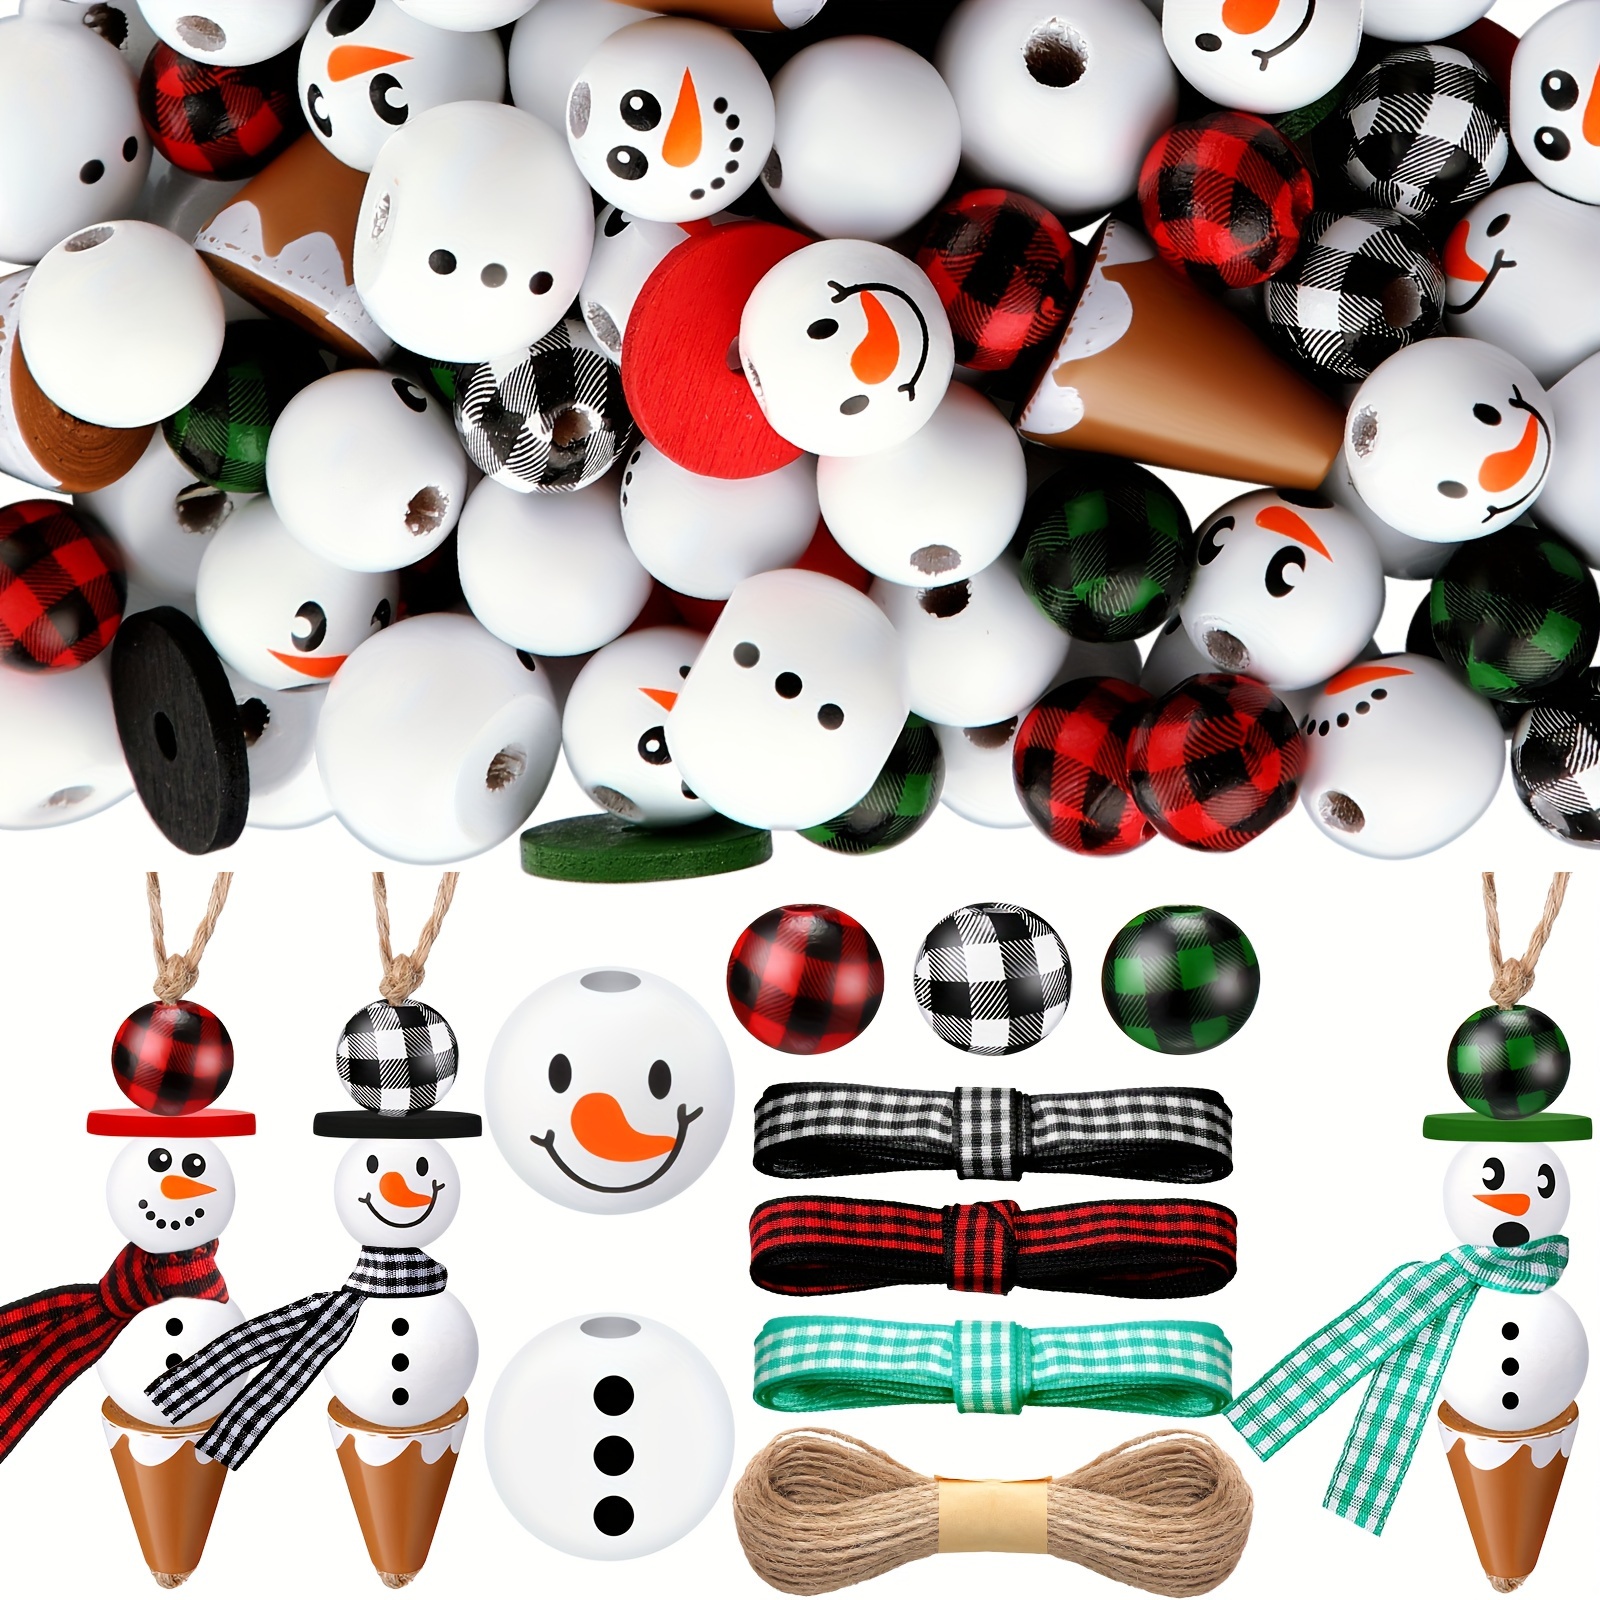 

255 Pcs Christmas Snowman Wooden Bead Ice Cream Snowman Wood Beads Wooden Beads Crafts Christmas Crafts For Adults Kids Christmas Beads Diy Christmas Ornaments With Twine Scarf (plaid, Classic)